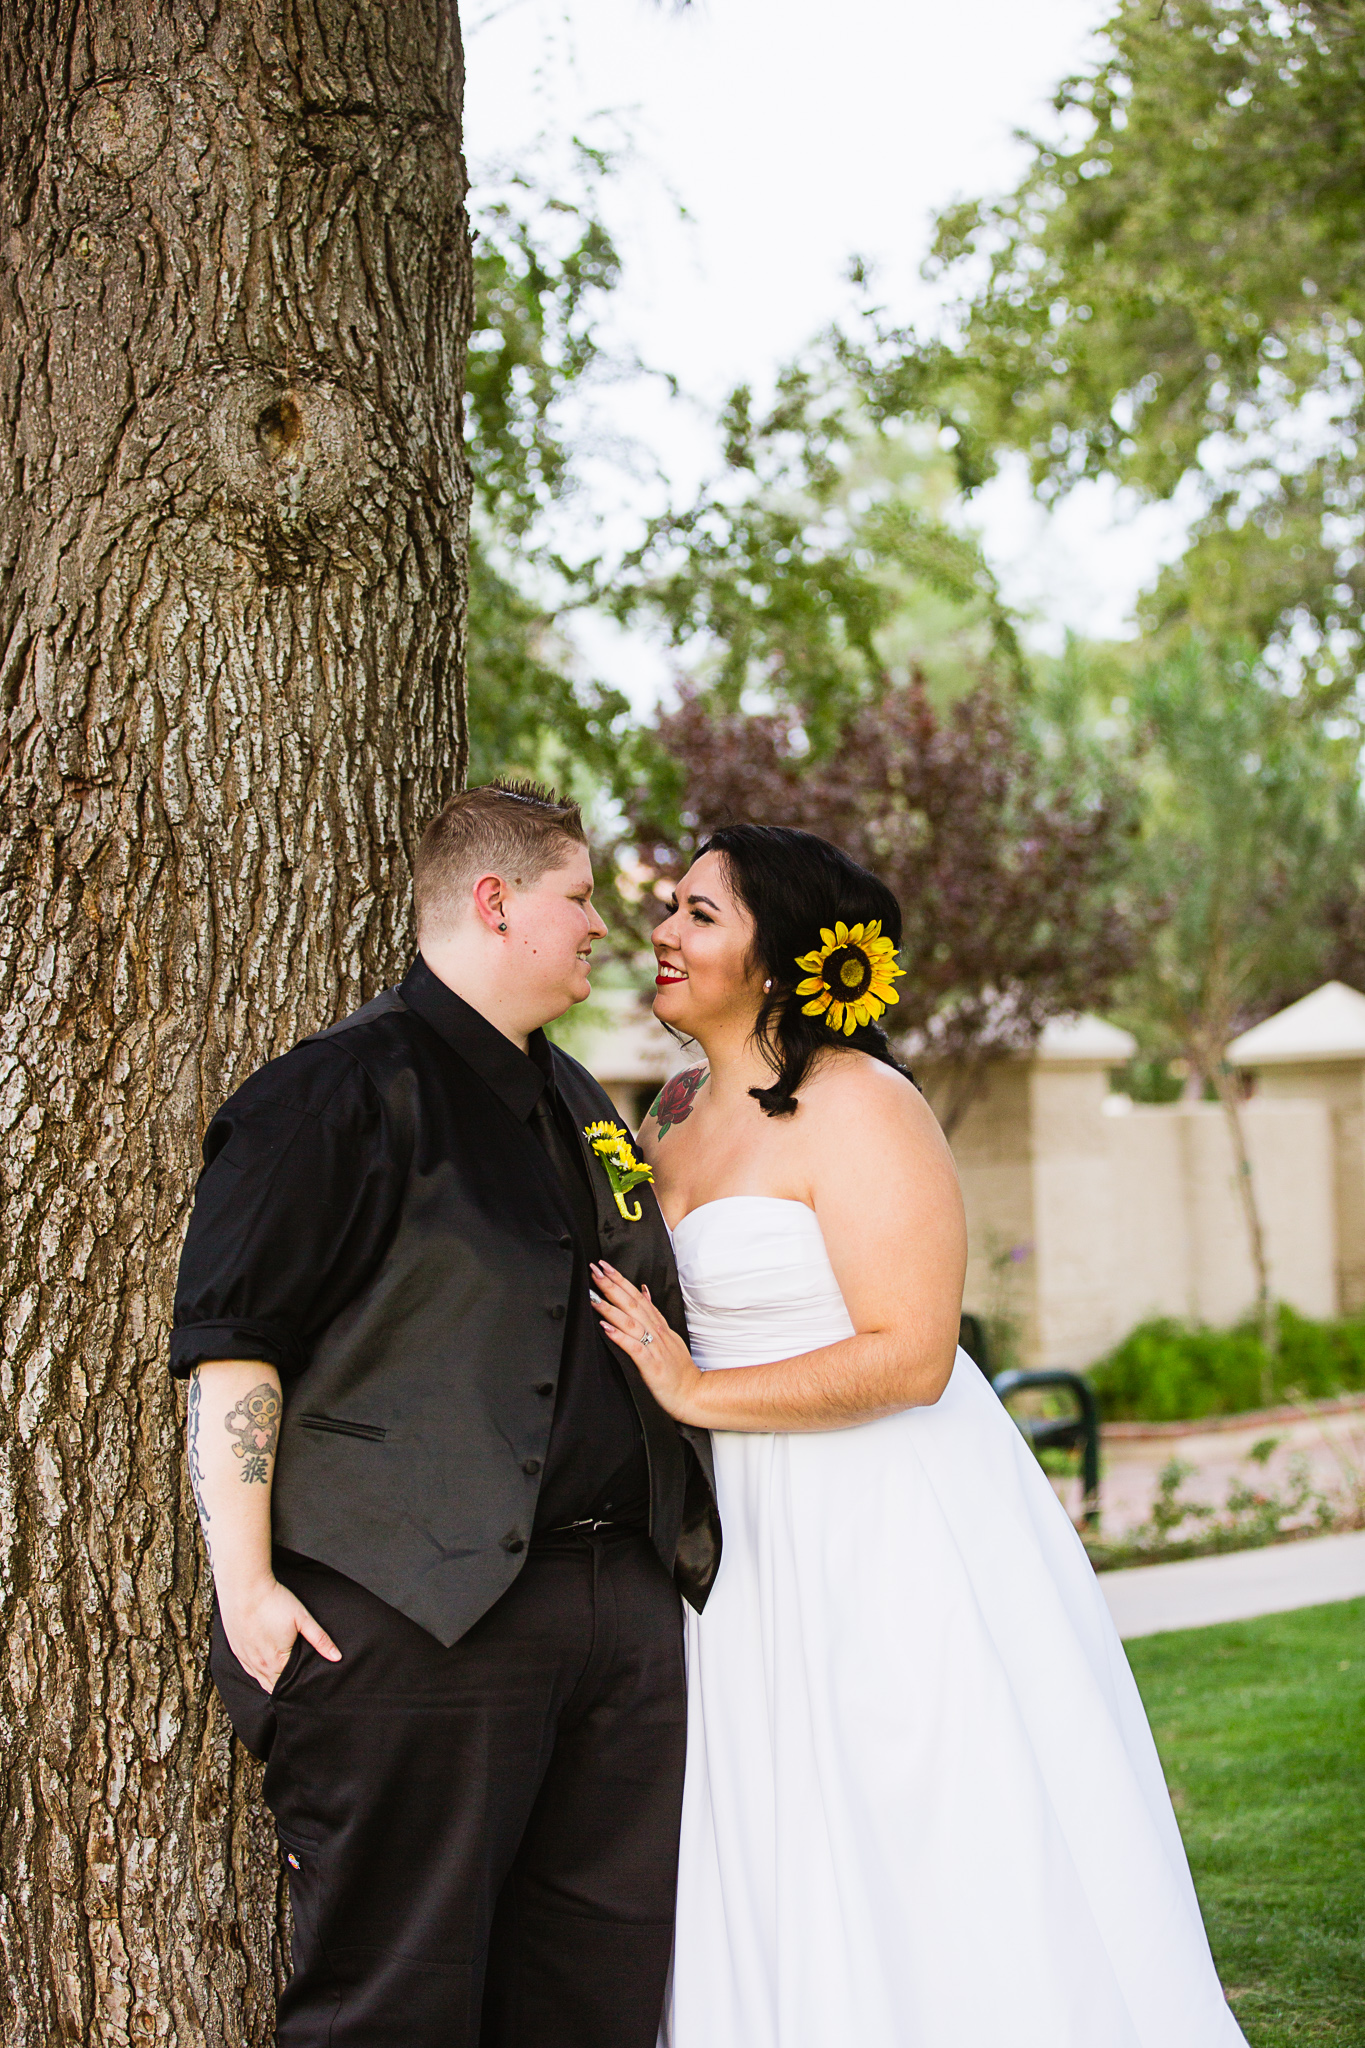 Brides share an intimate moment leaning against a tree on their wedding day by LGBT friendly wedding photographer PMA Photography.